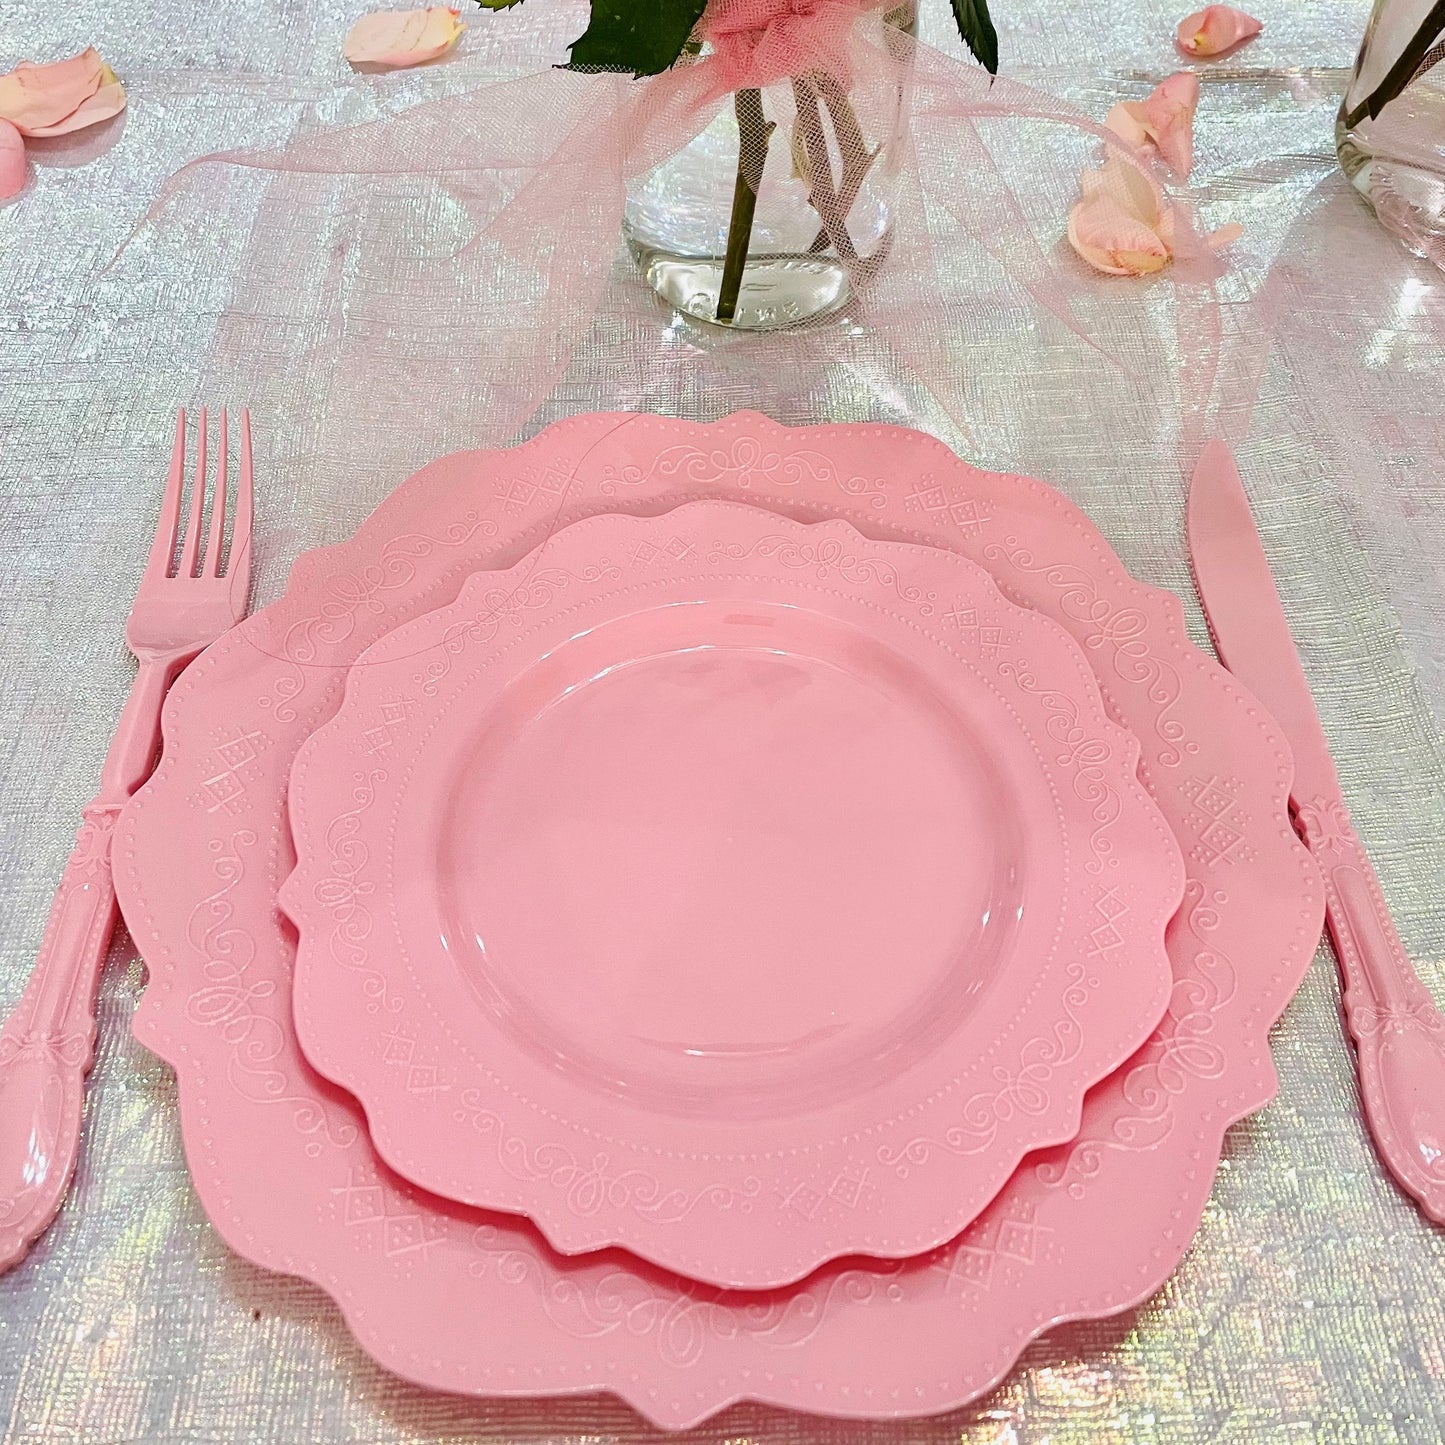 Elegant Pink Tableware Bundle, Dinner Plates, Dessert Plates, Cutlery, Disposable Partyware for 20 guests, 88 total pieces